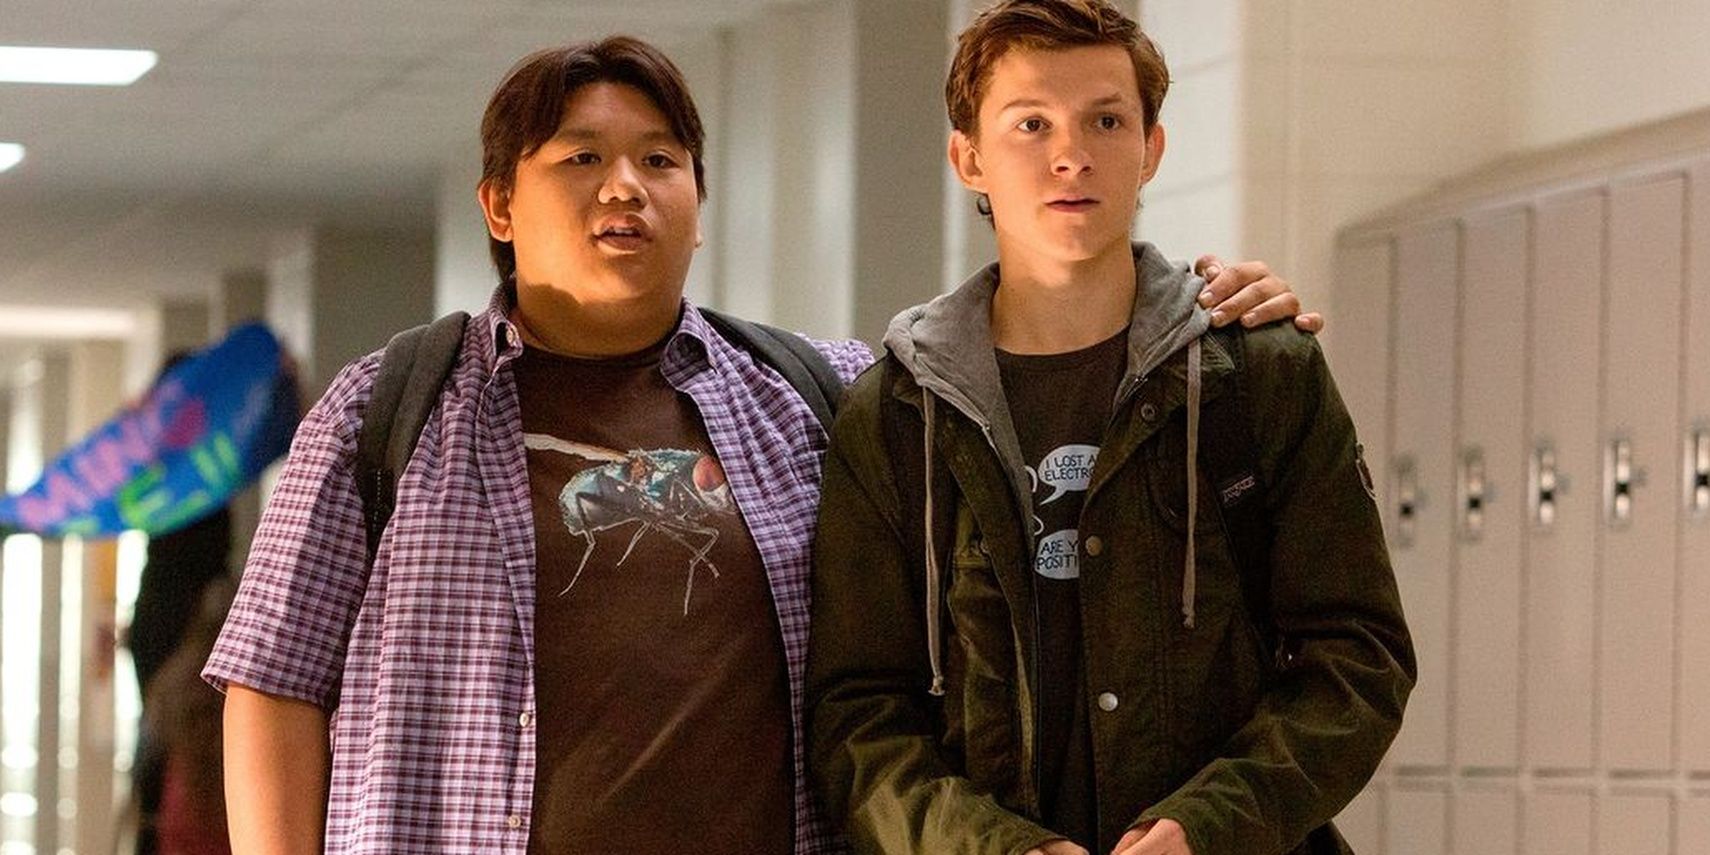 Ned With His Arm Around Peter In The School Hallway